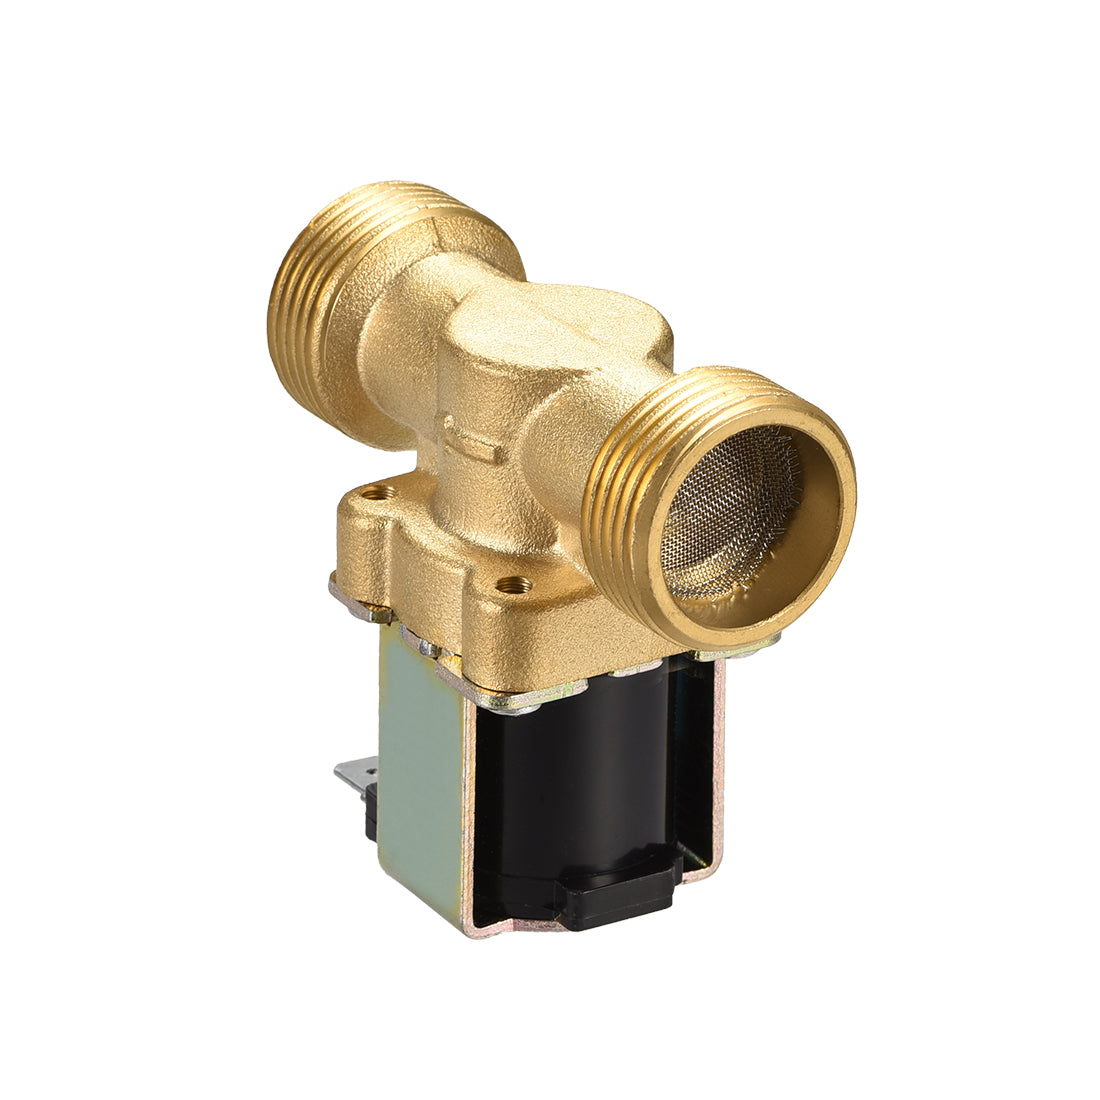 uxcell Uxcell DC12V G3/4 Brass Water Electric Solenoid Valve Normally Closed N/C No Pressure Water Inlet Flow Switch Electric Magnetic Valve